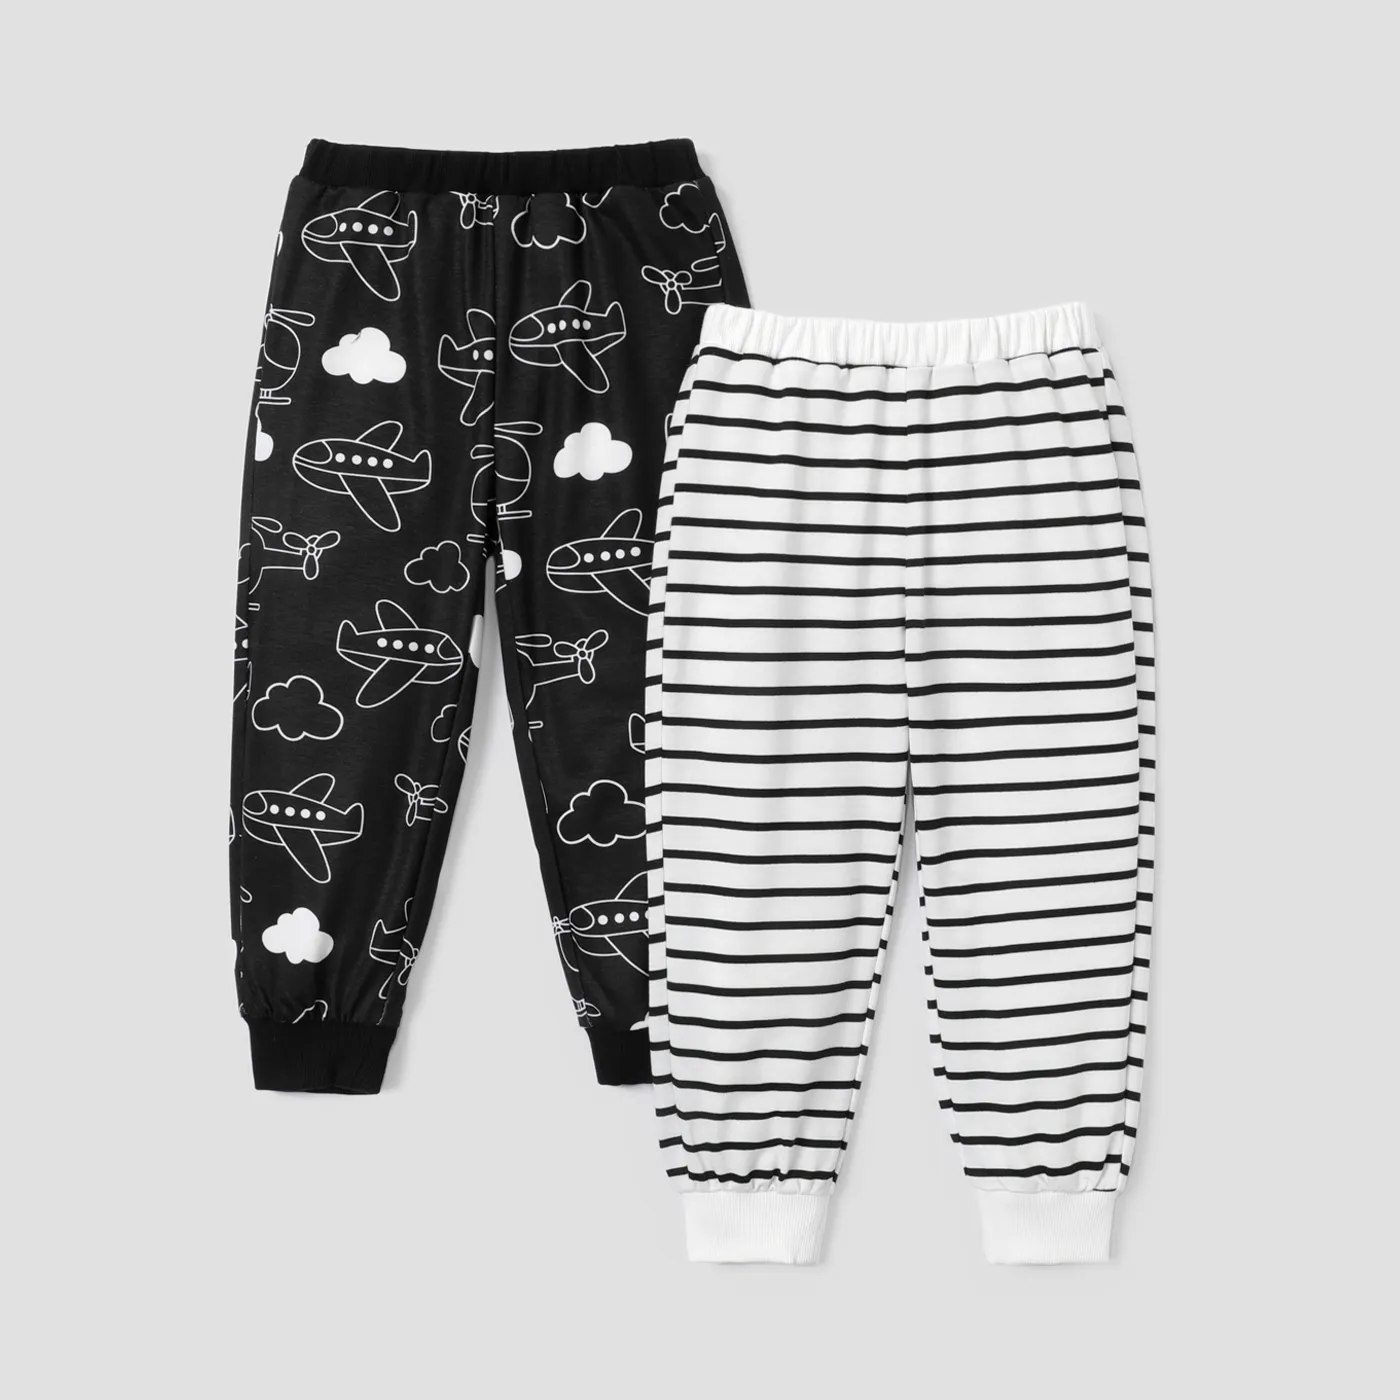 2-Pack Toddler Boy Naia  Helicopter Print/Stripe Elasticized Pants